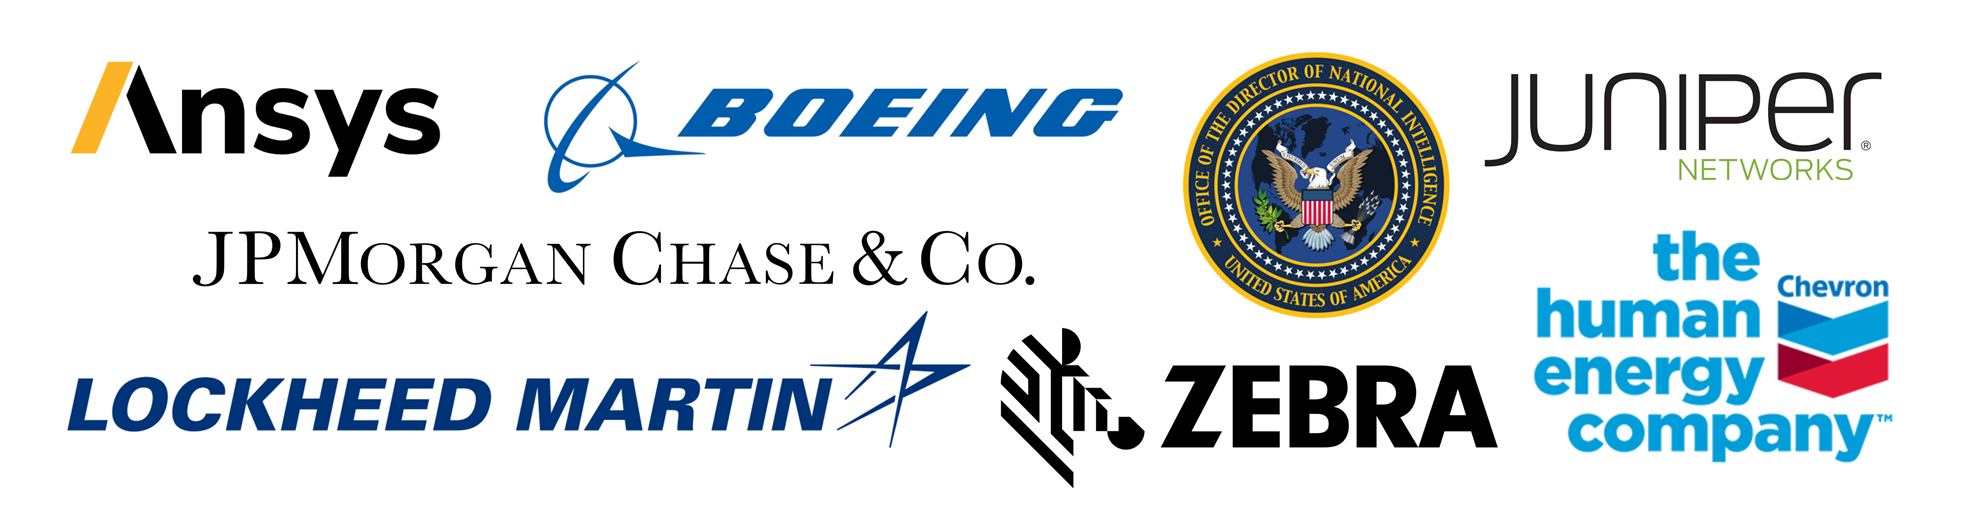 OAC Sponsors, which include: Ansys, Boeing, Chevron, Lockheed Martin, JP Morgan & Chase, Zebra, ODNI, Juniper Networks